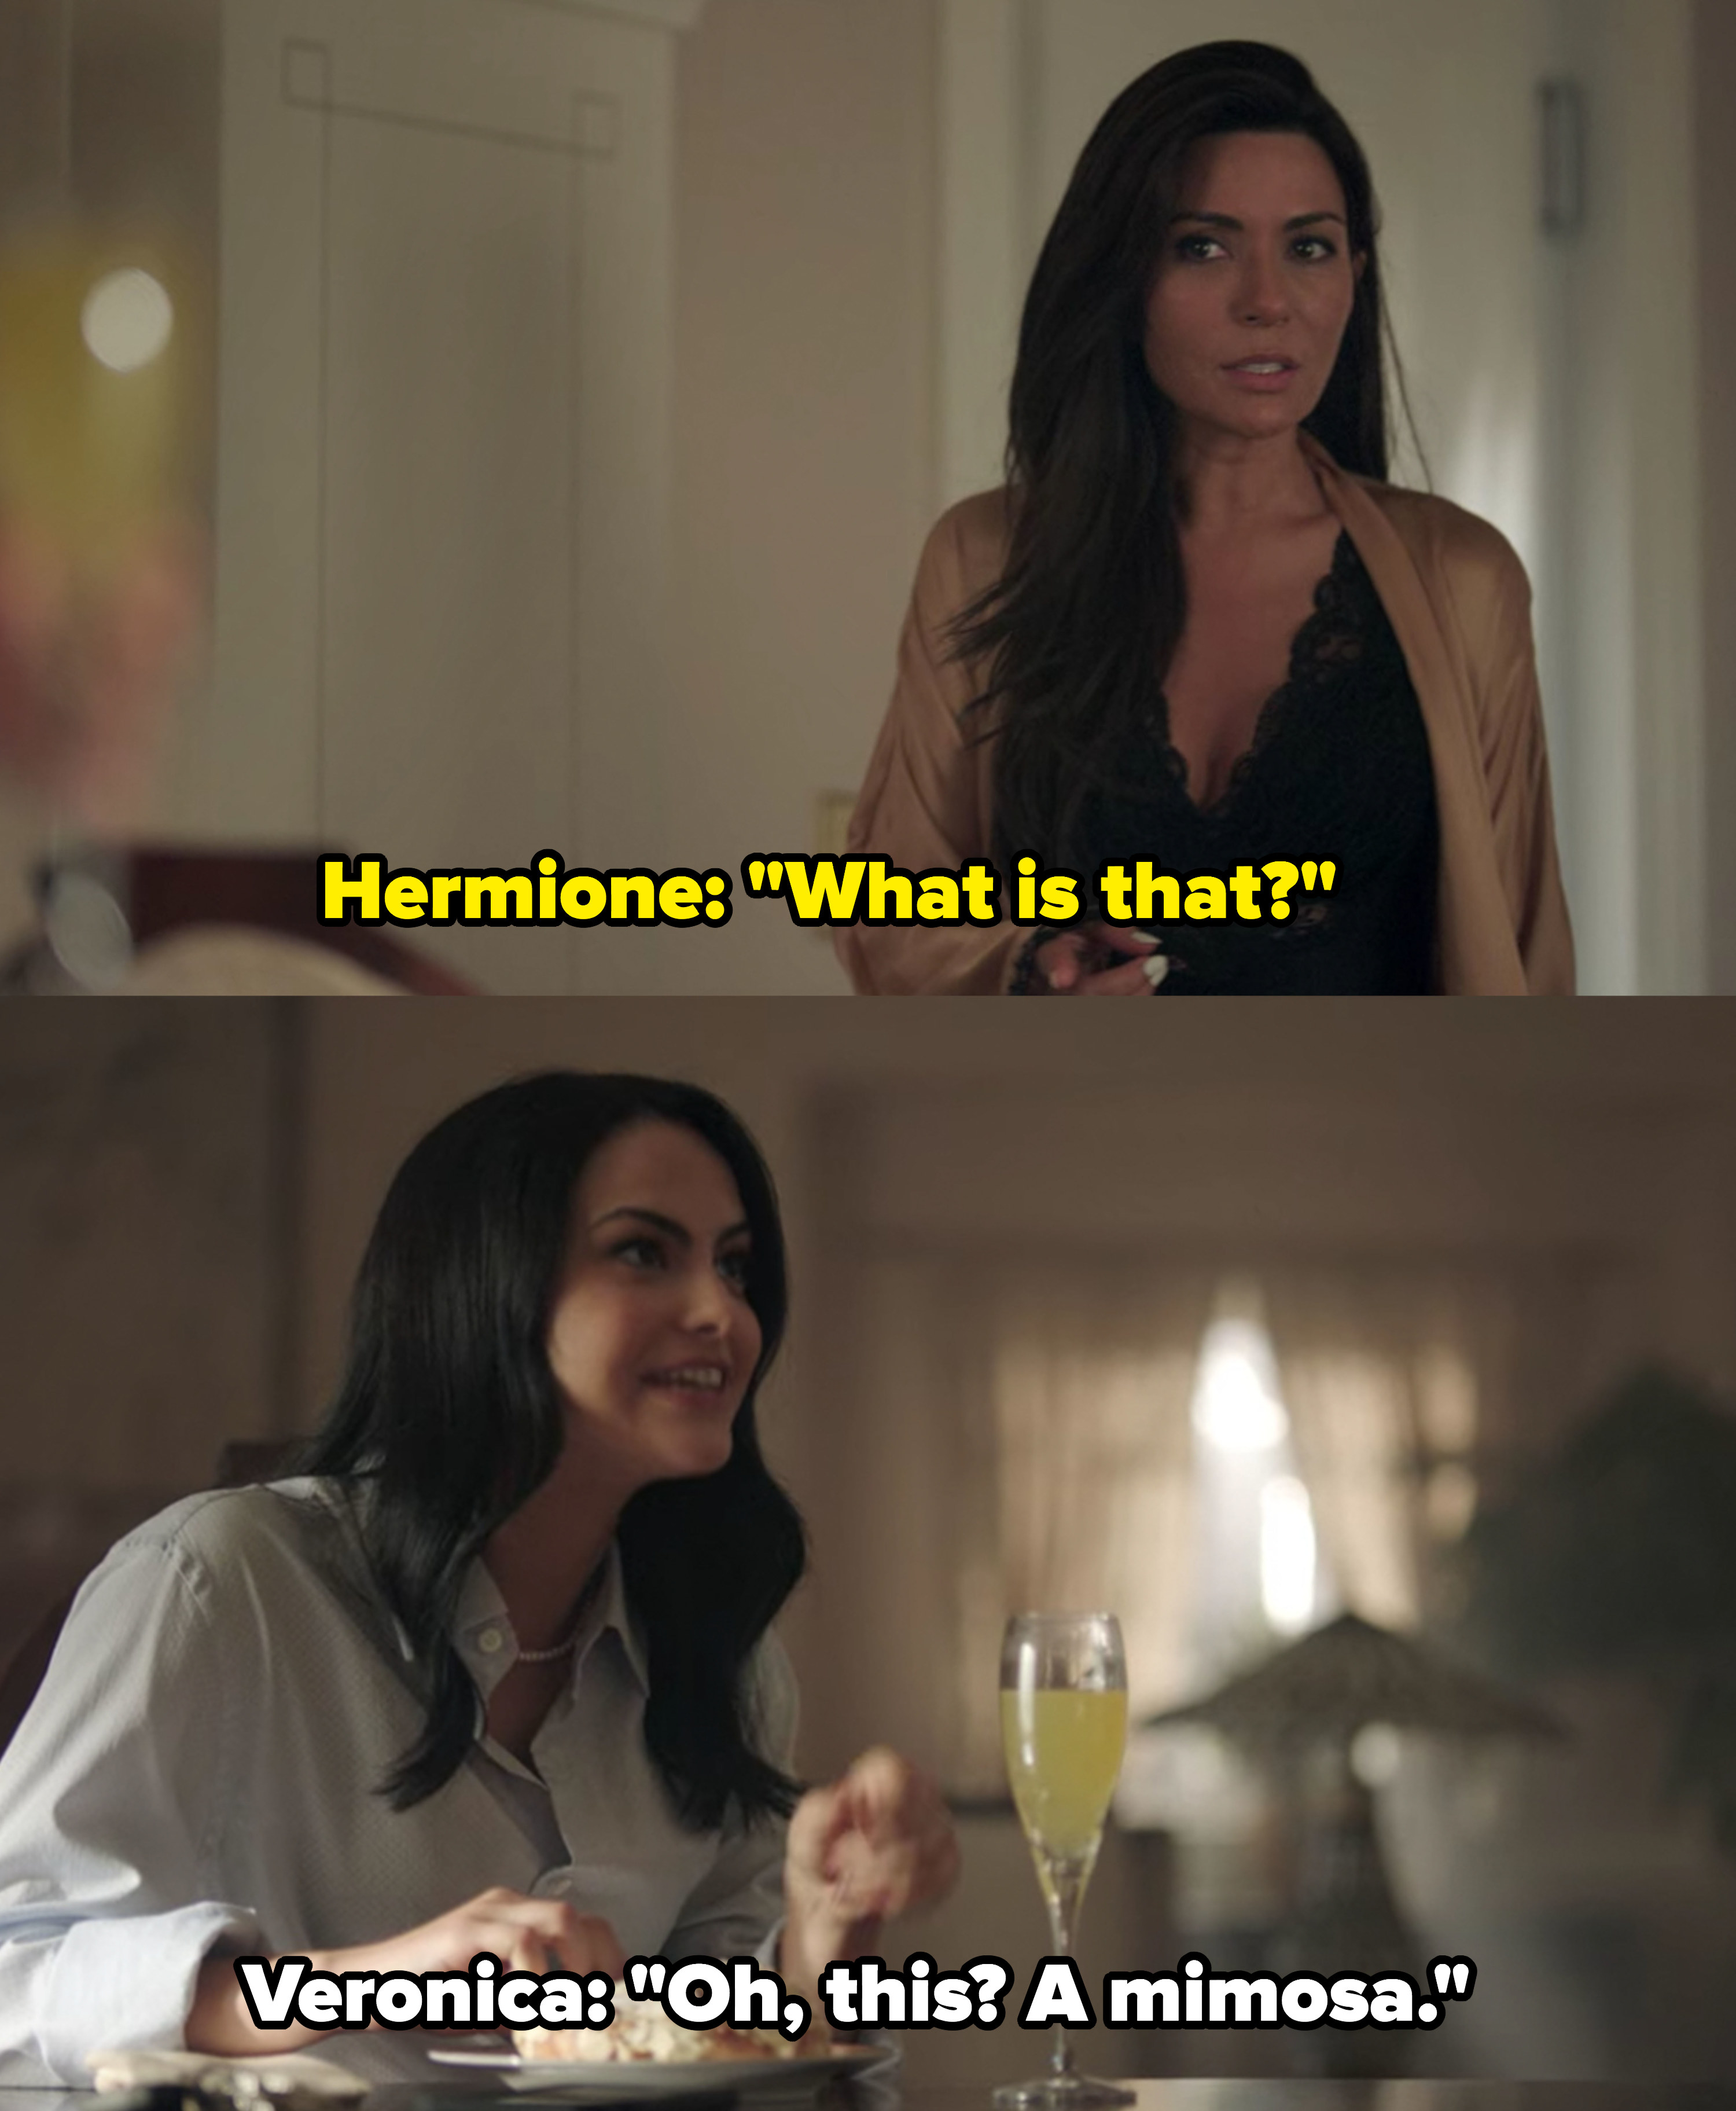 Veronica casually sips a mimosa in front of her mom to irritate her